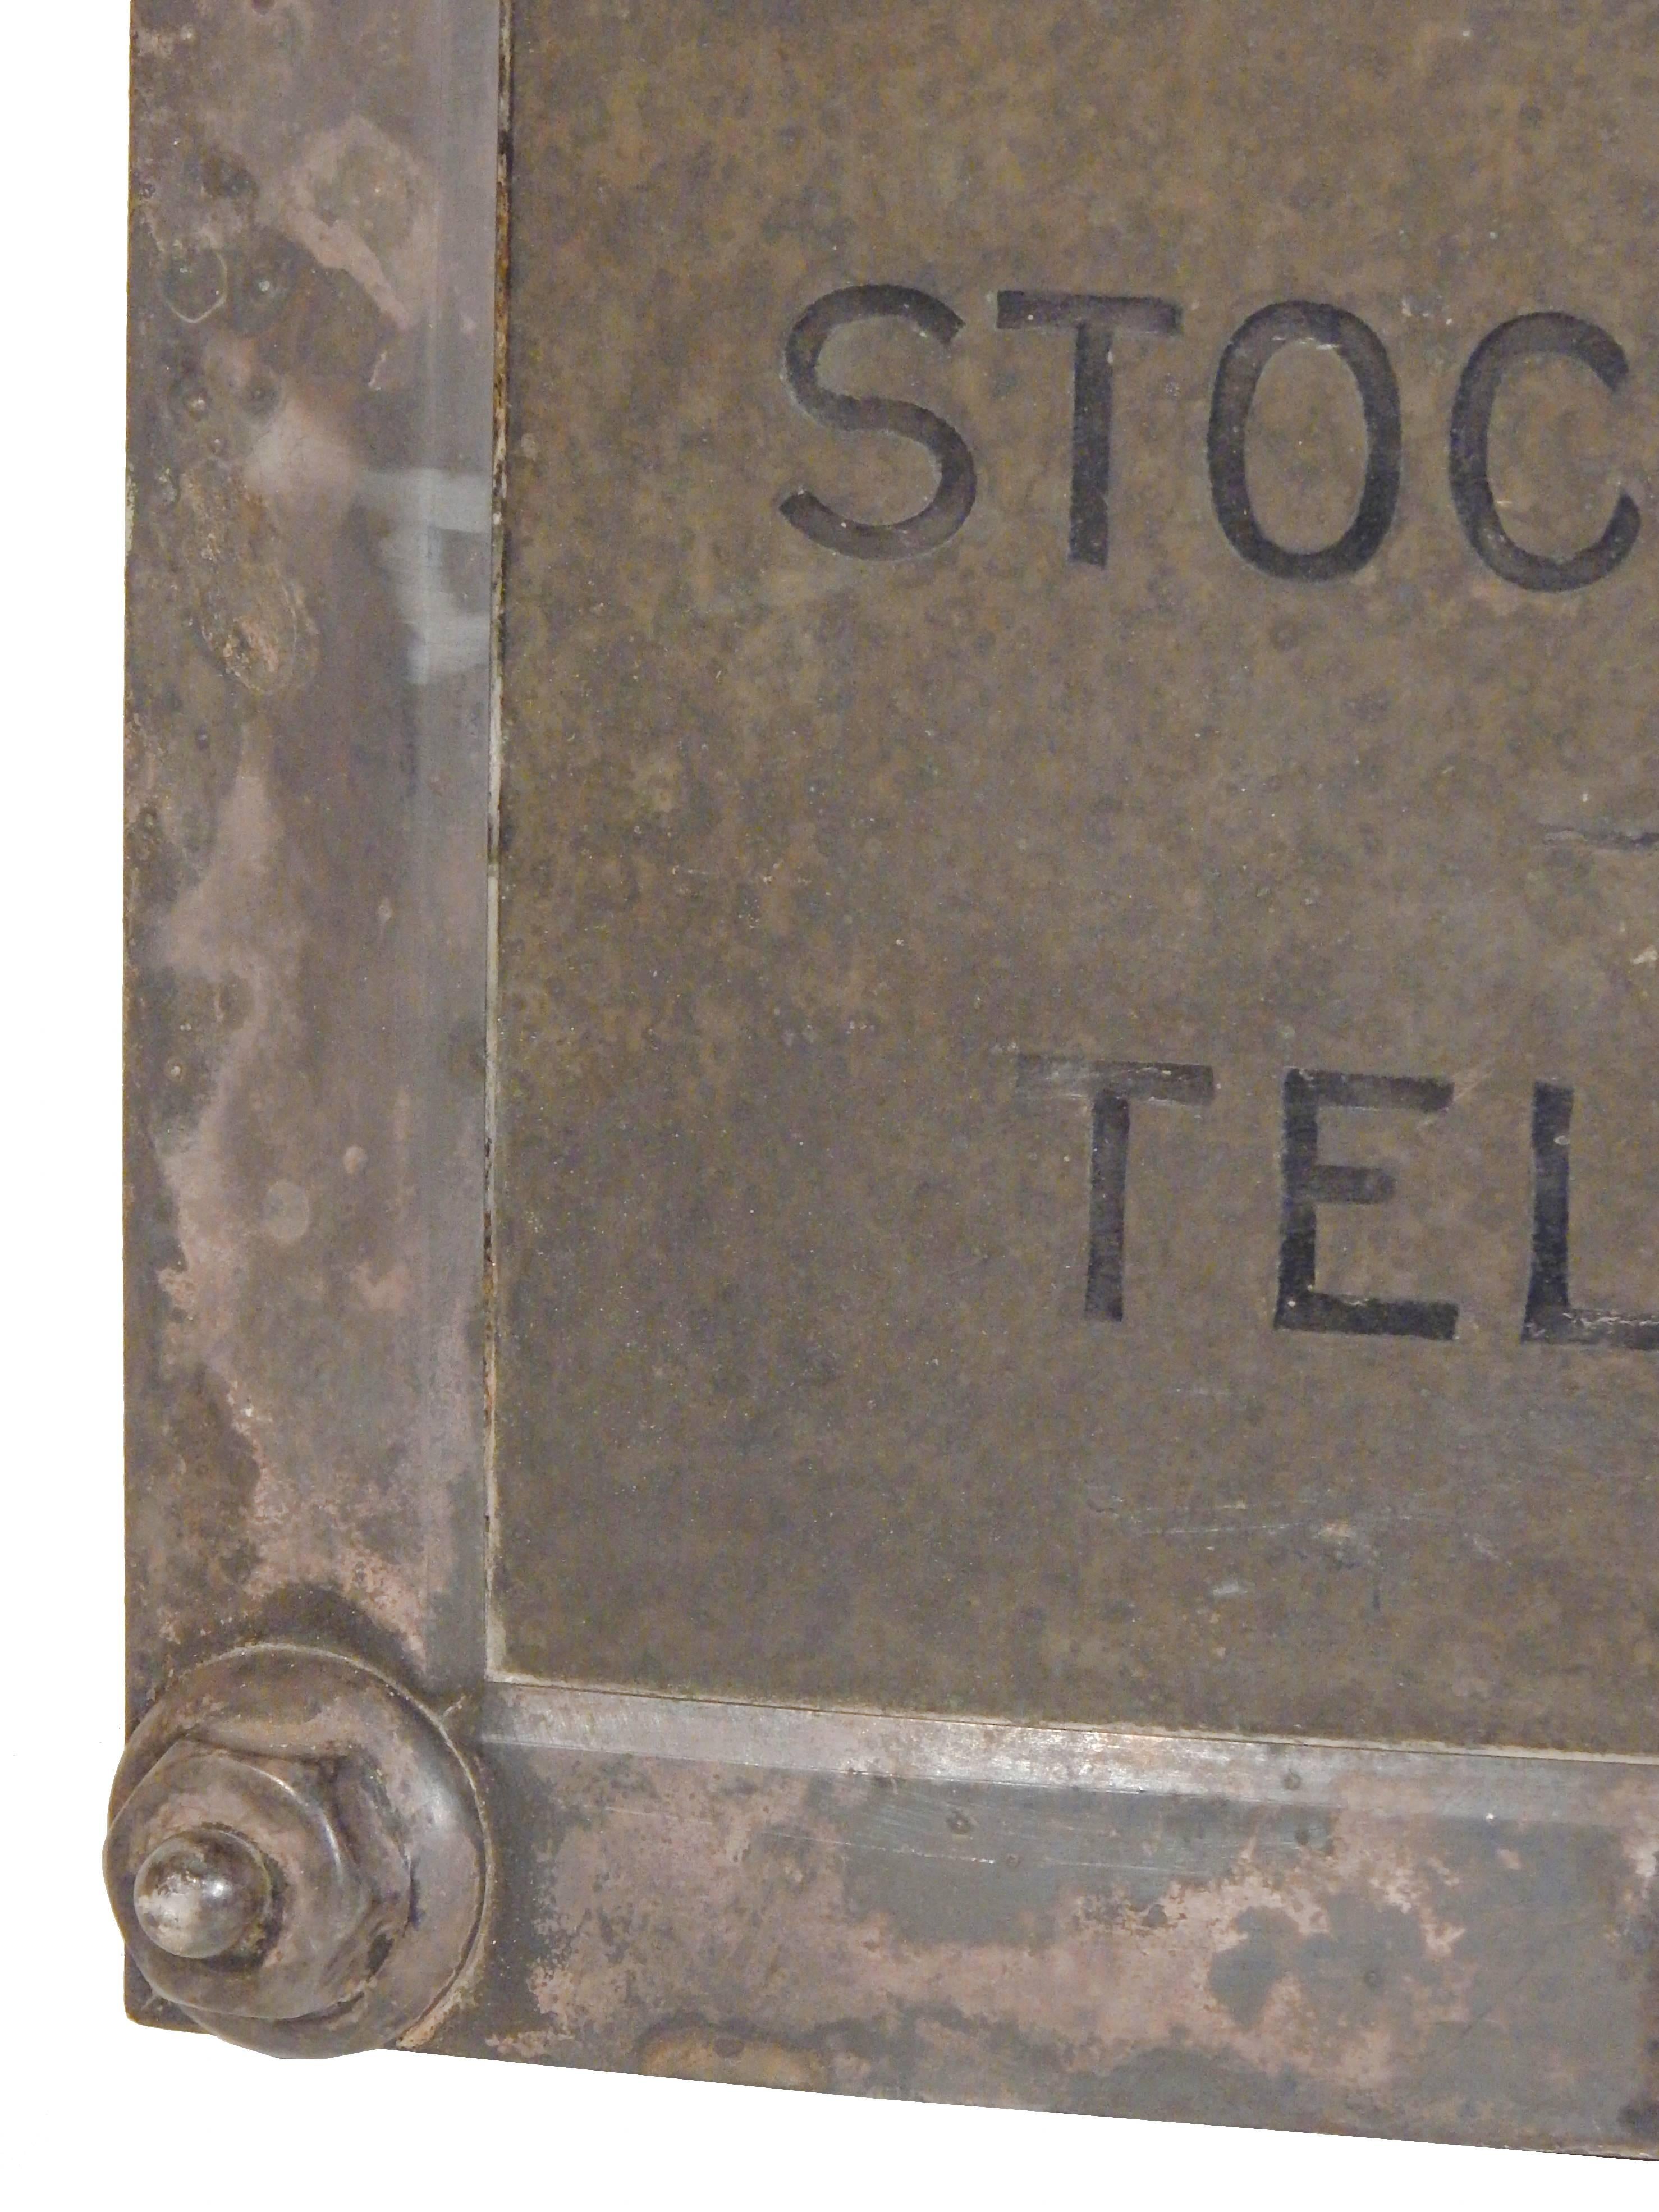 Early Stock Broker Sign In Distressed Condition In Bridgehampton, NY